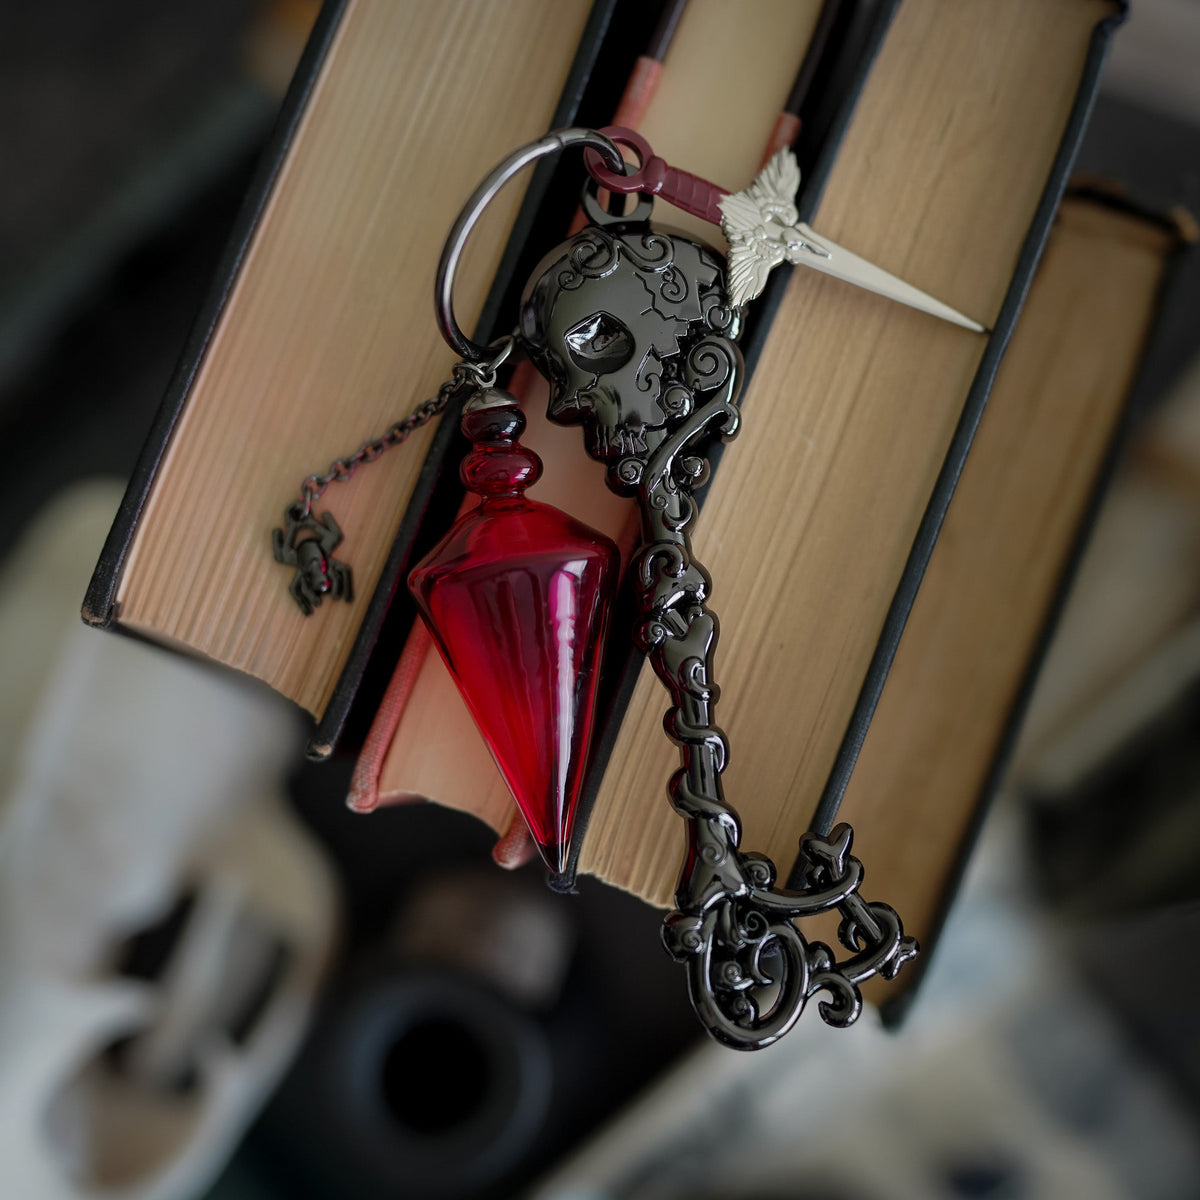 The Red Church Key from Nevernight with skull design and two deadly charms: Mia&#39;s gravebone dagger and a red vial of poison.